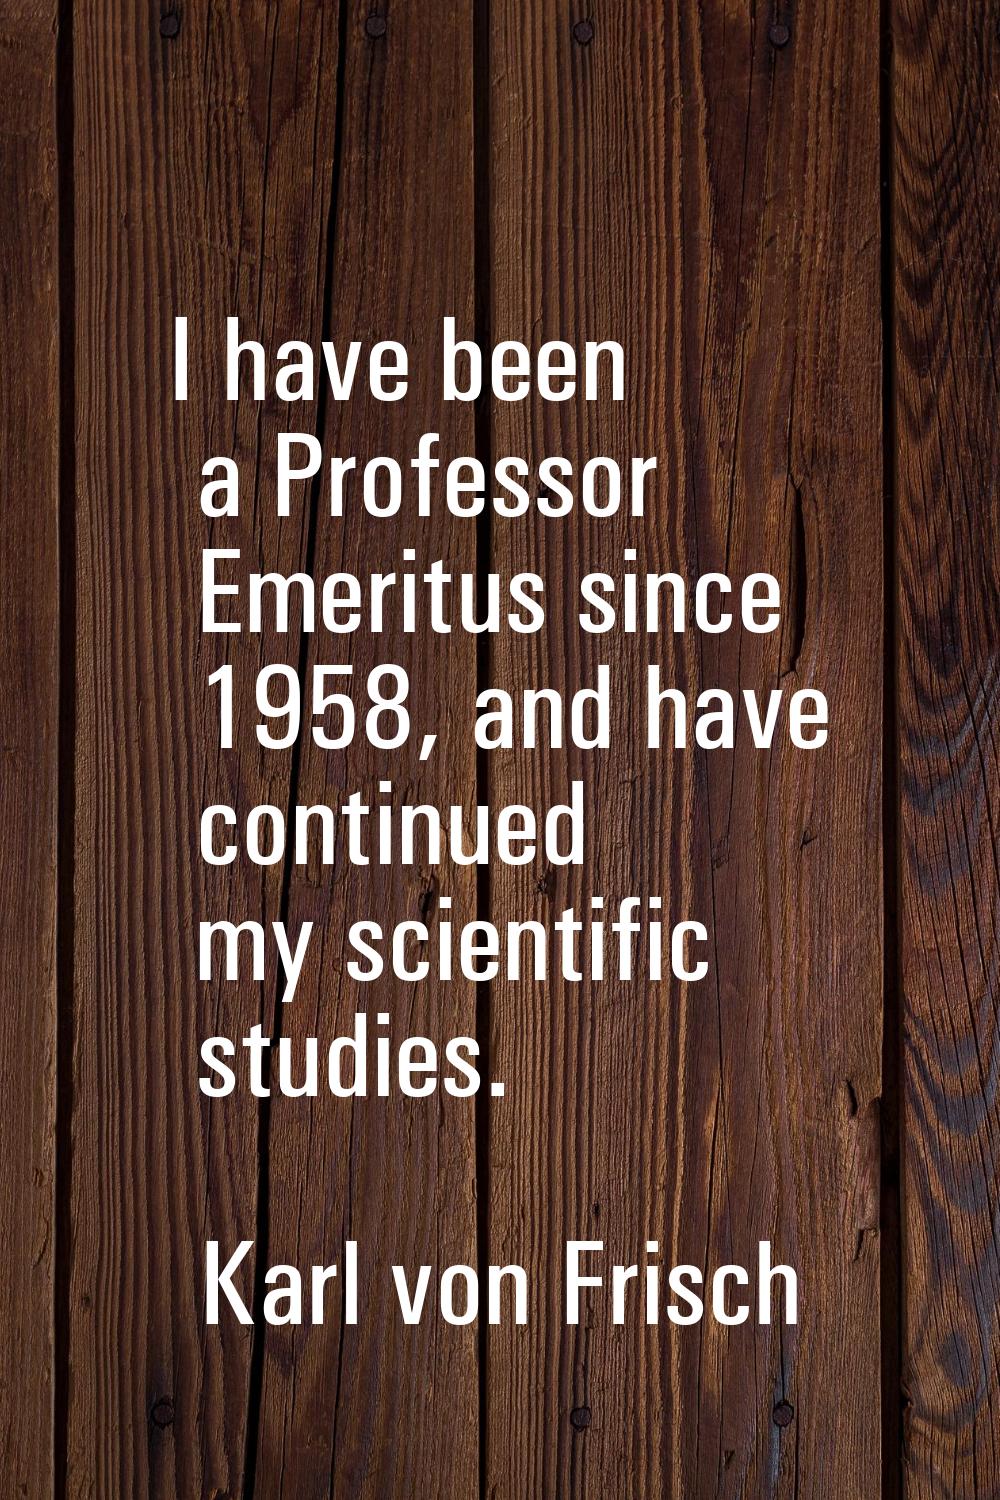 I have been a Professor Emeritus since 1958, and have continued my scientific studies.